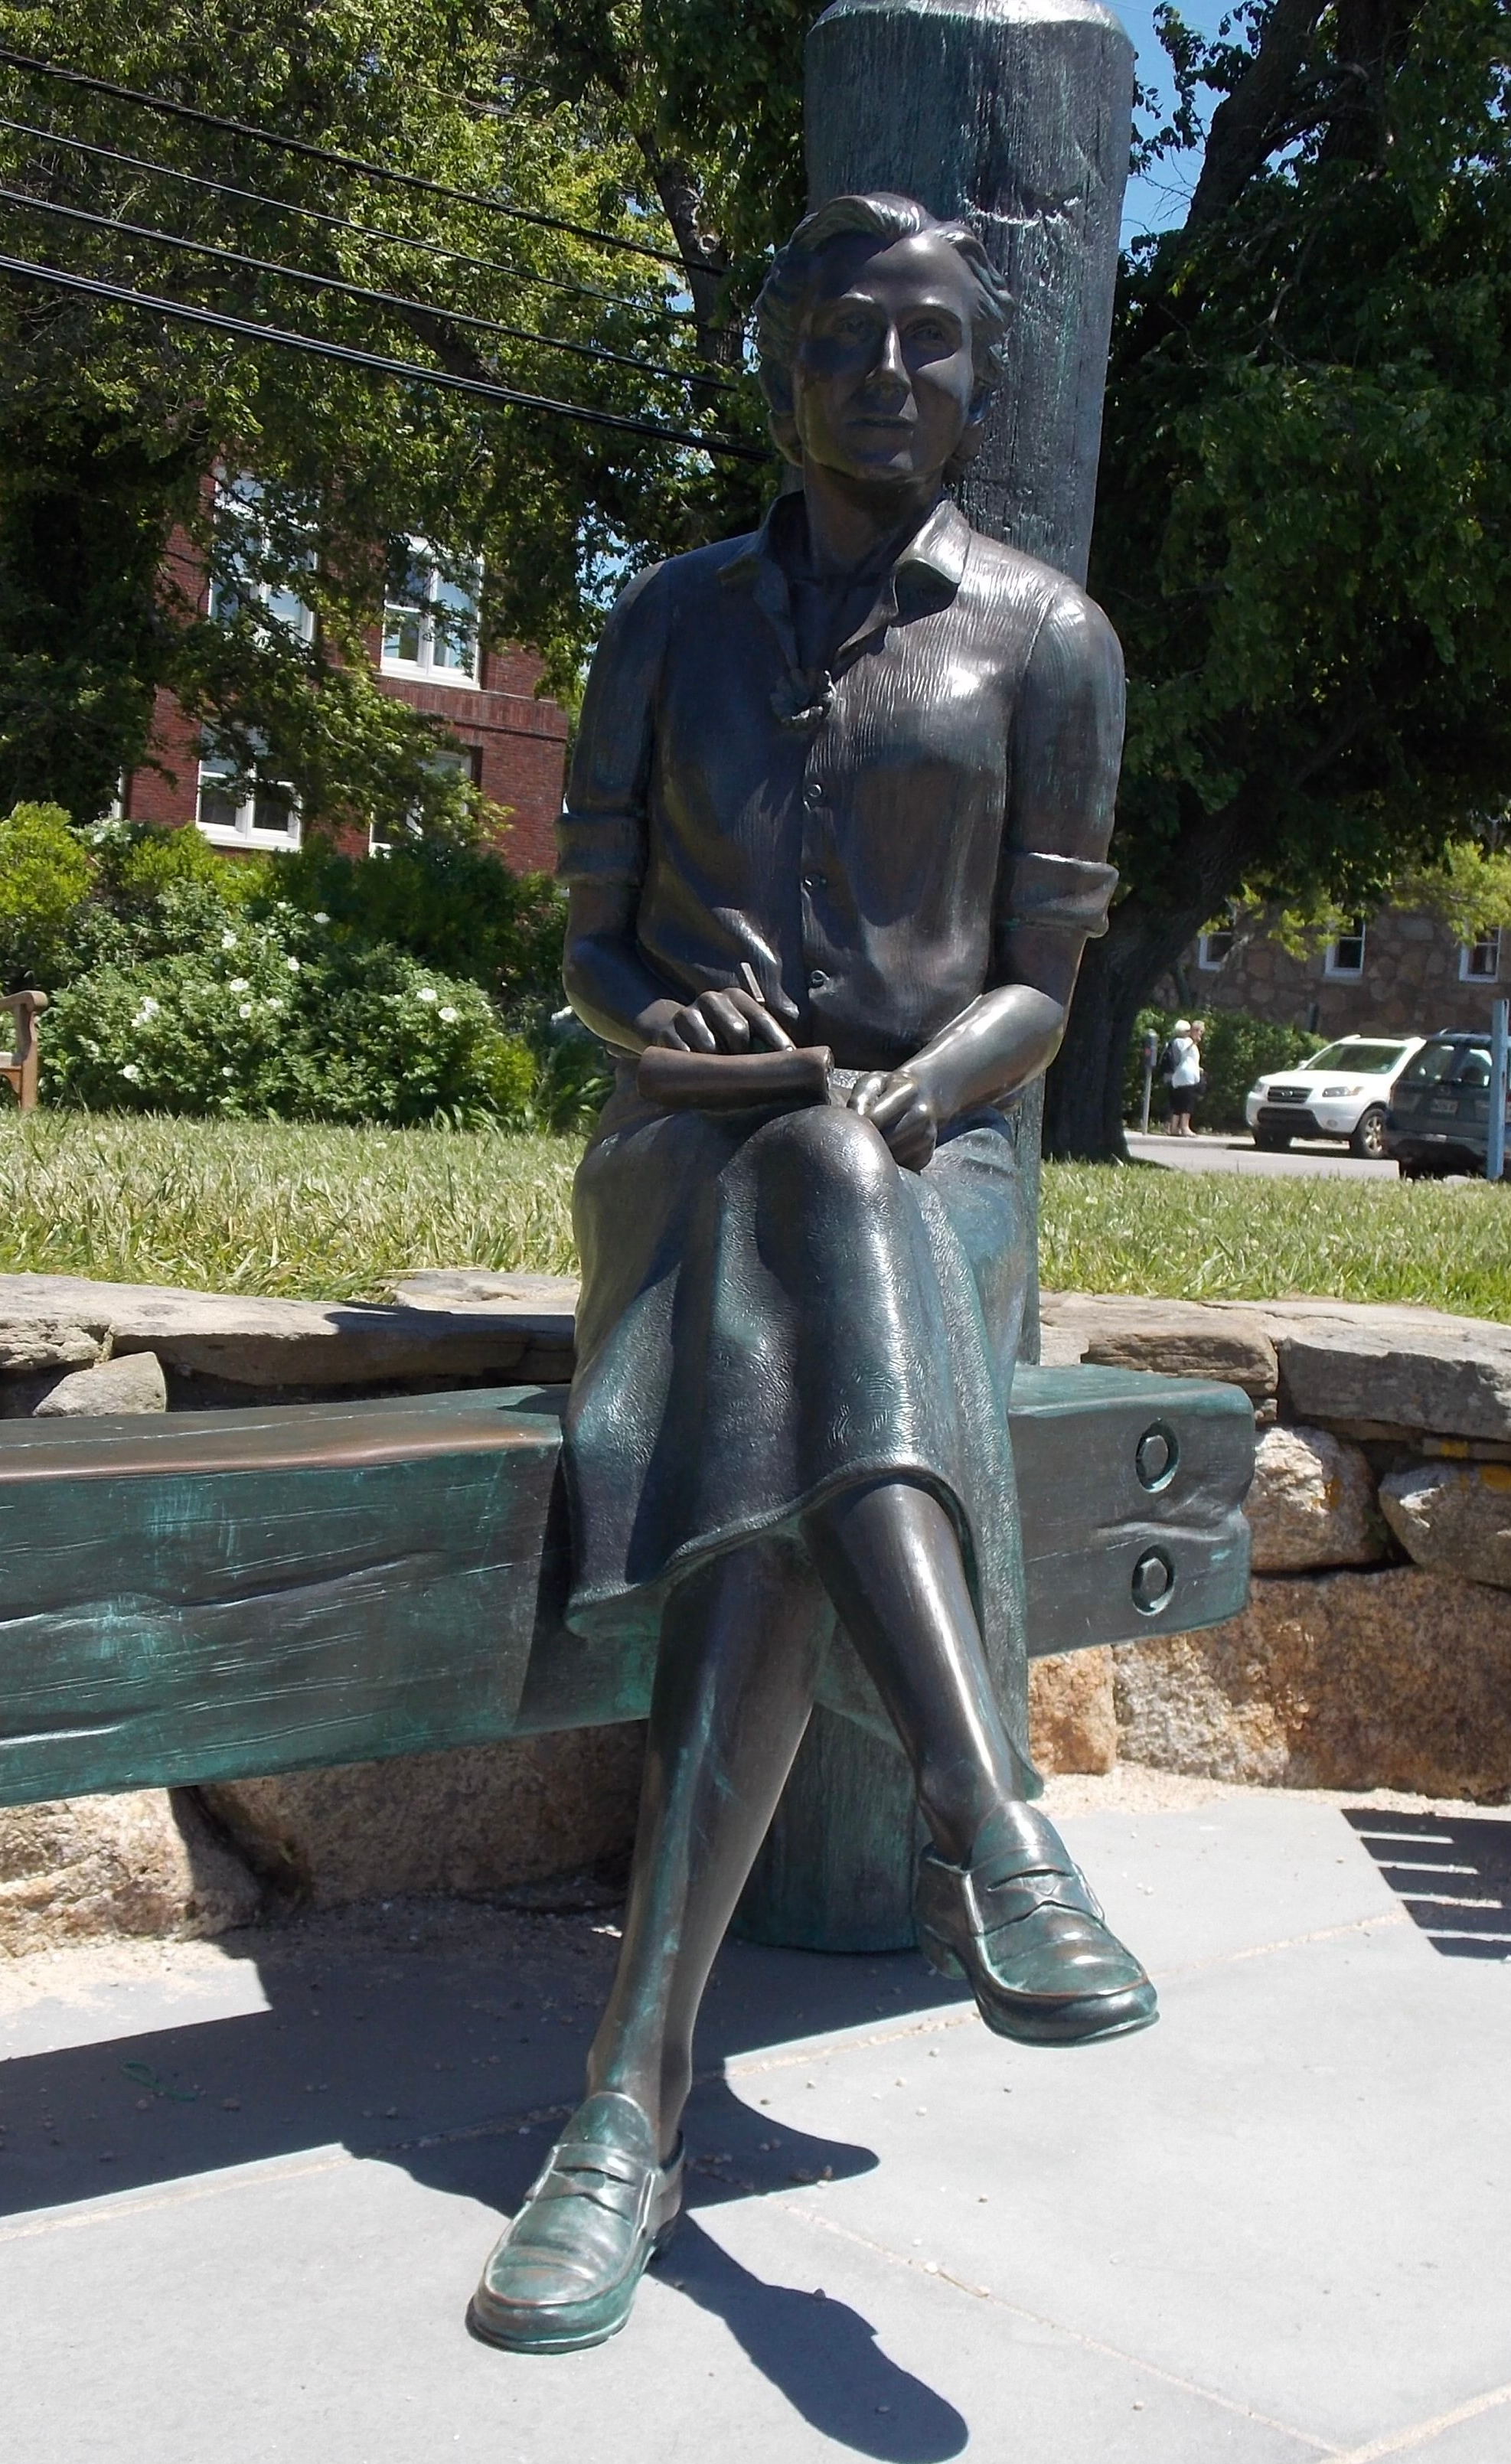 A life-size bronze statue of Rachel Carson in the Marine Biological Laboratory’s (MBL) Waterfront Park.